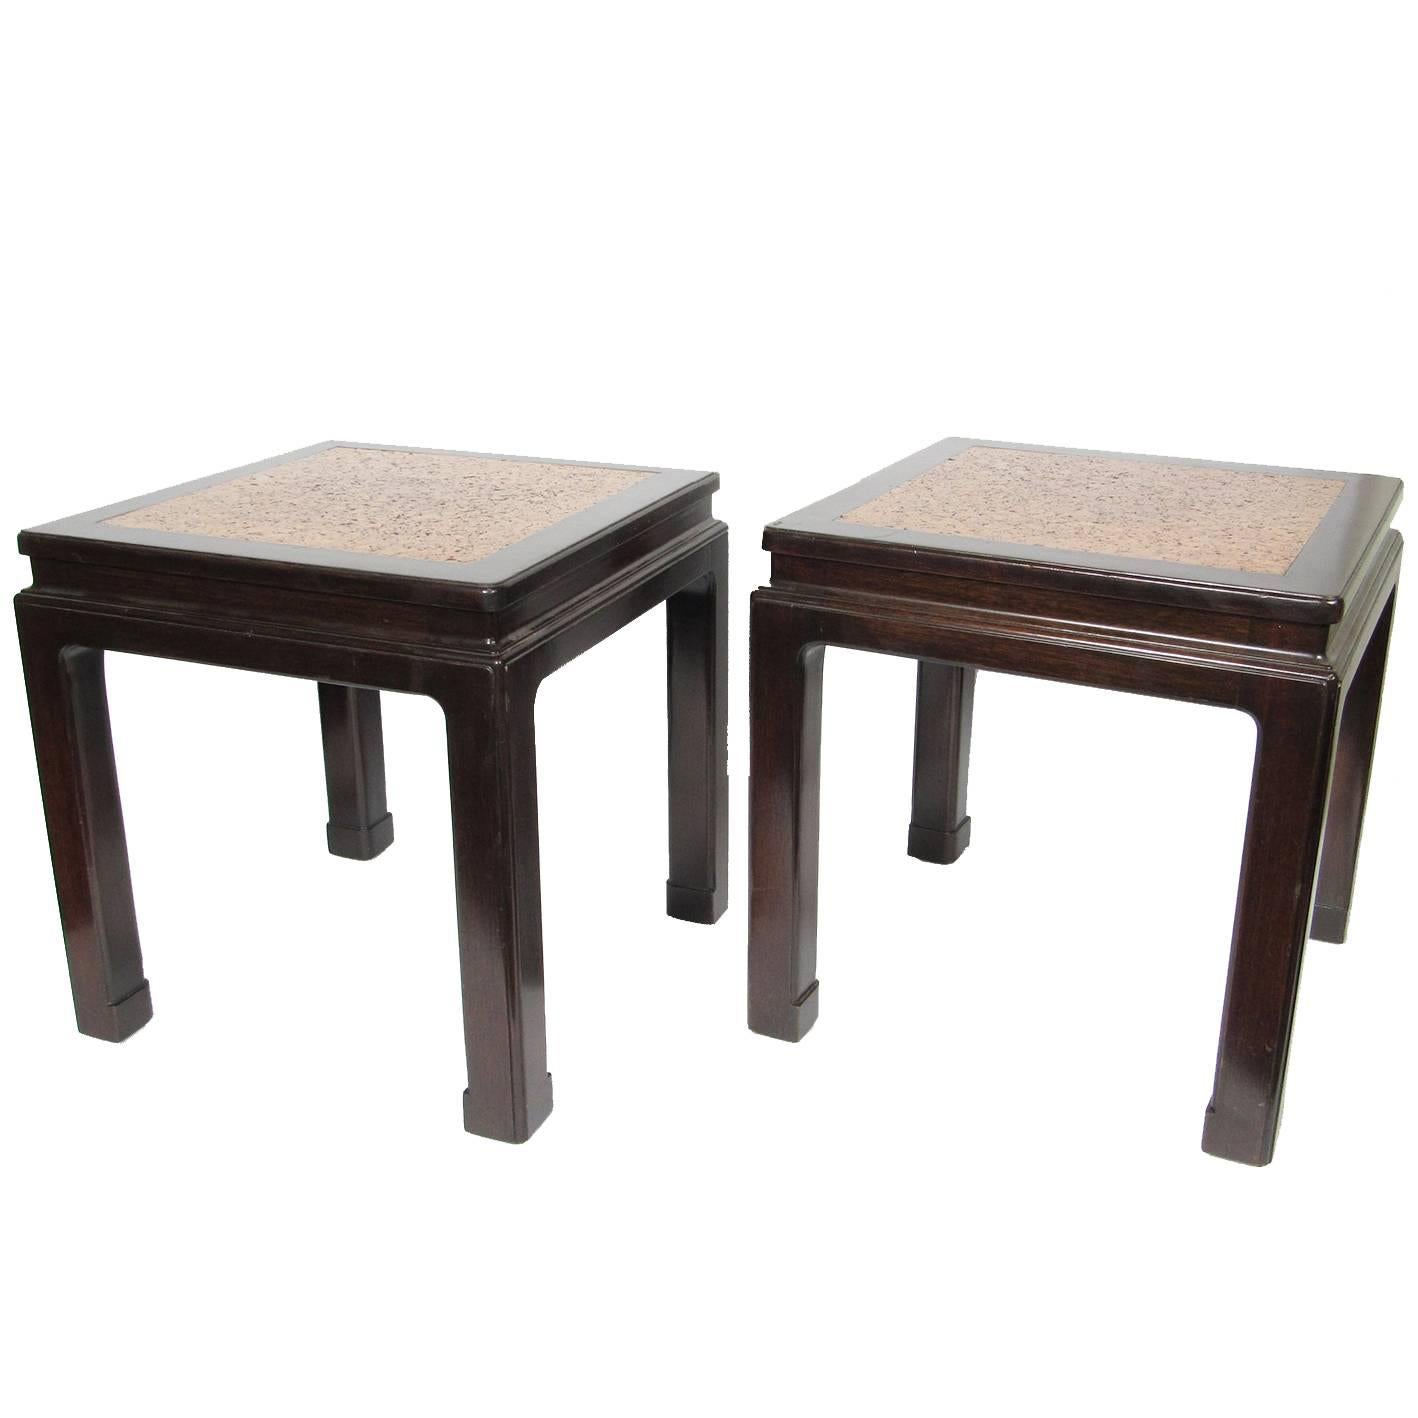 Pair of Mid-Century Dunbar Asian Inspired Side Tables with Cork Inlaid Tops For Sale